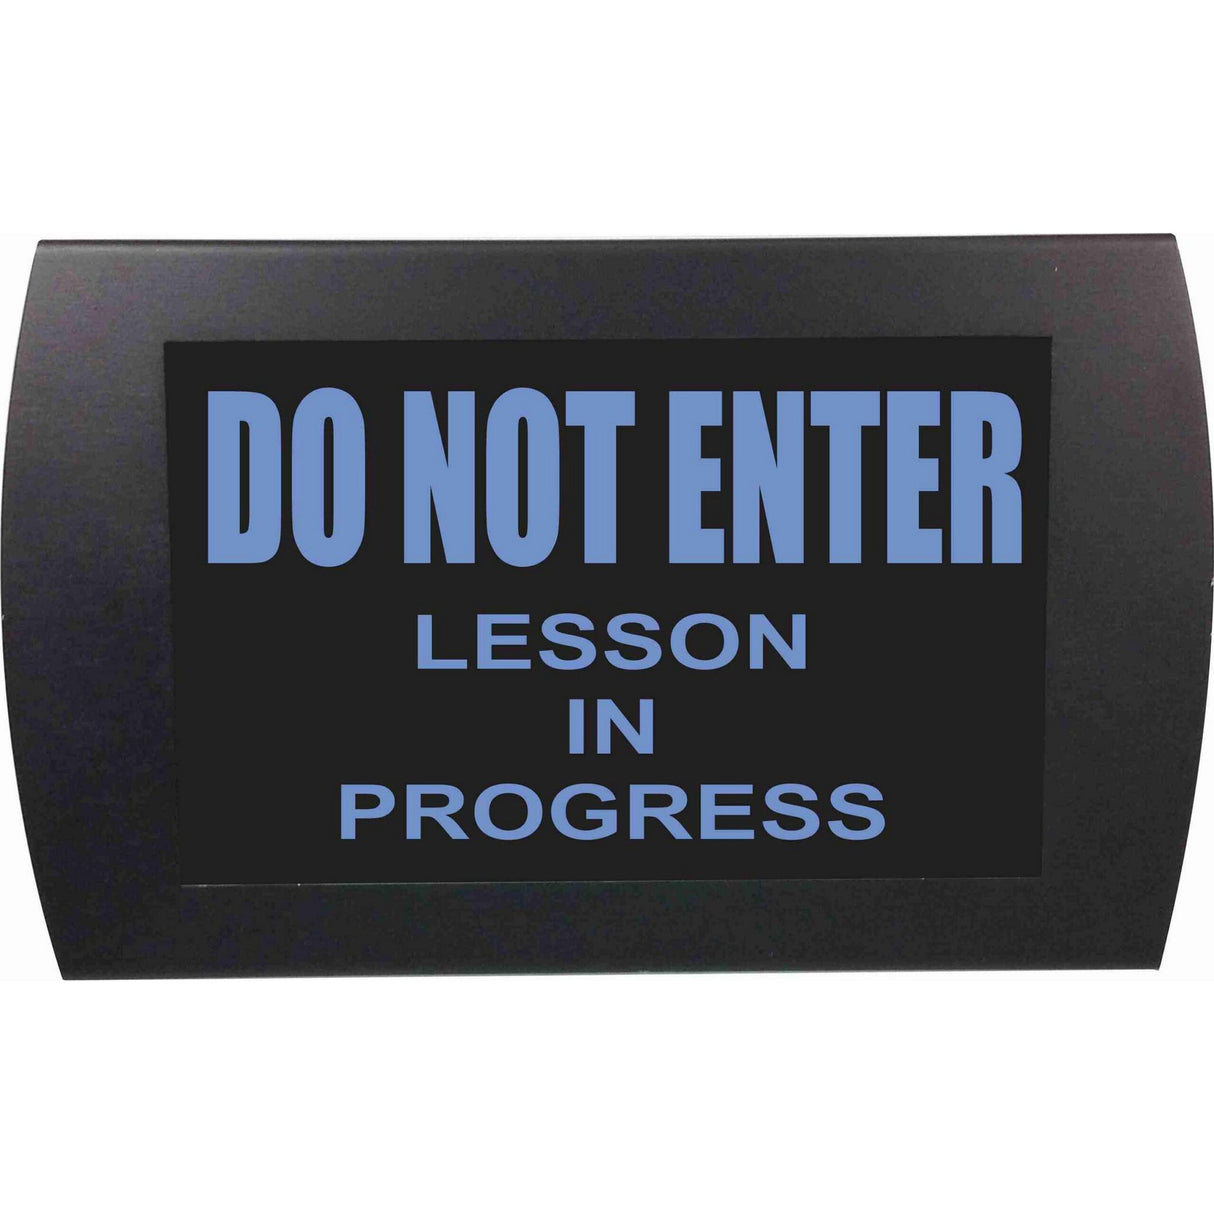 American Recorder OAS-2019M-BL "DO NOT ENTER - LESSON" LED Lighted Sign, Blue